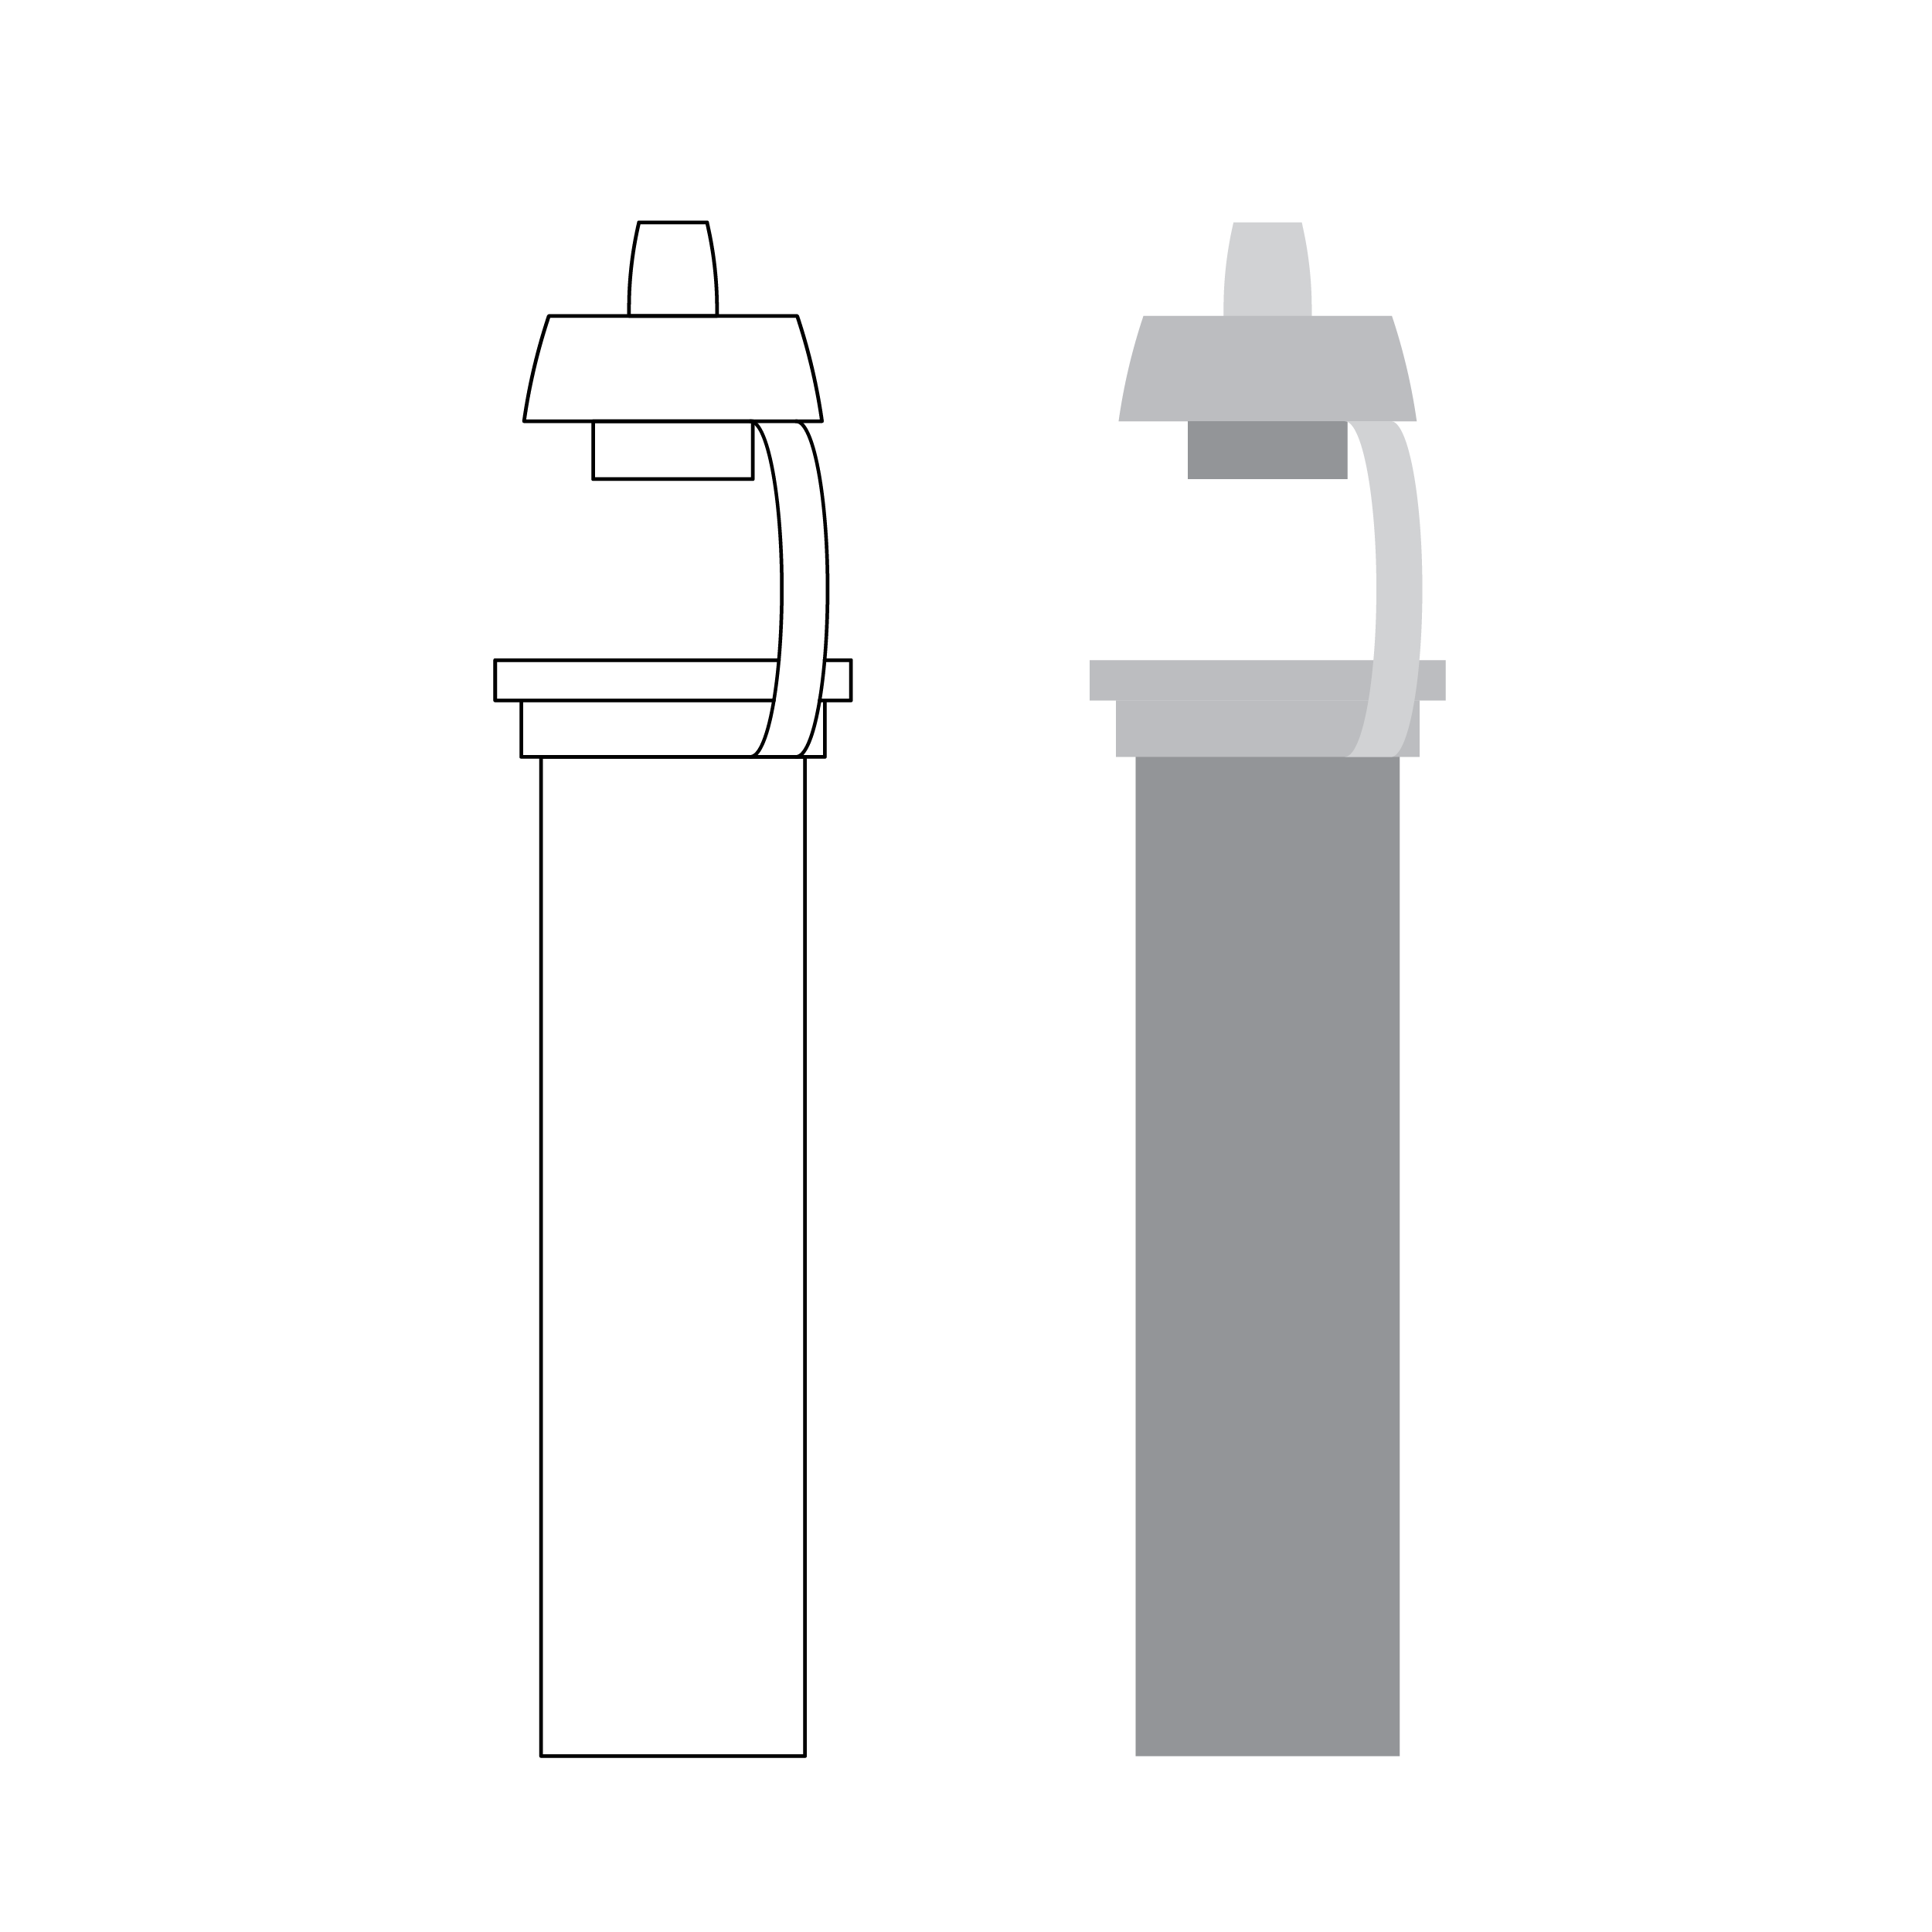 Two-dimensional line drawing of a fluid vial with thin black lines and a two-dimensional illustration of a fluid vial using color fills of two shades of gray.